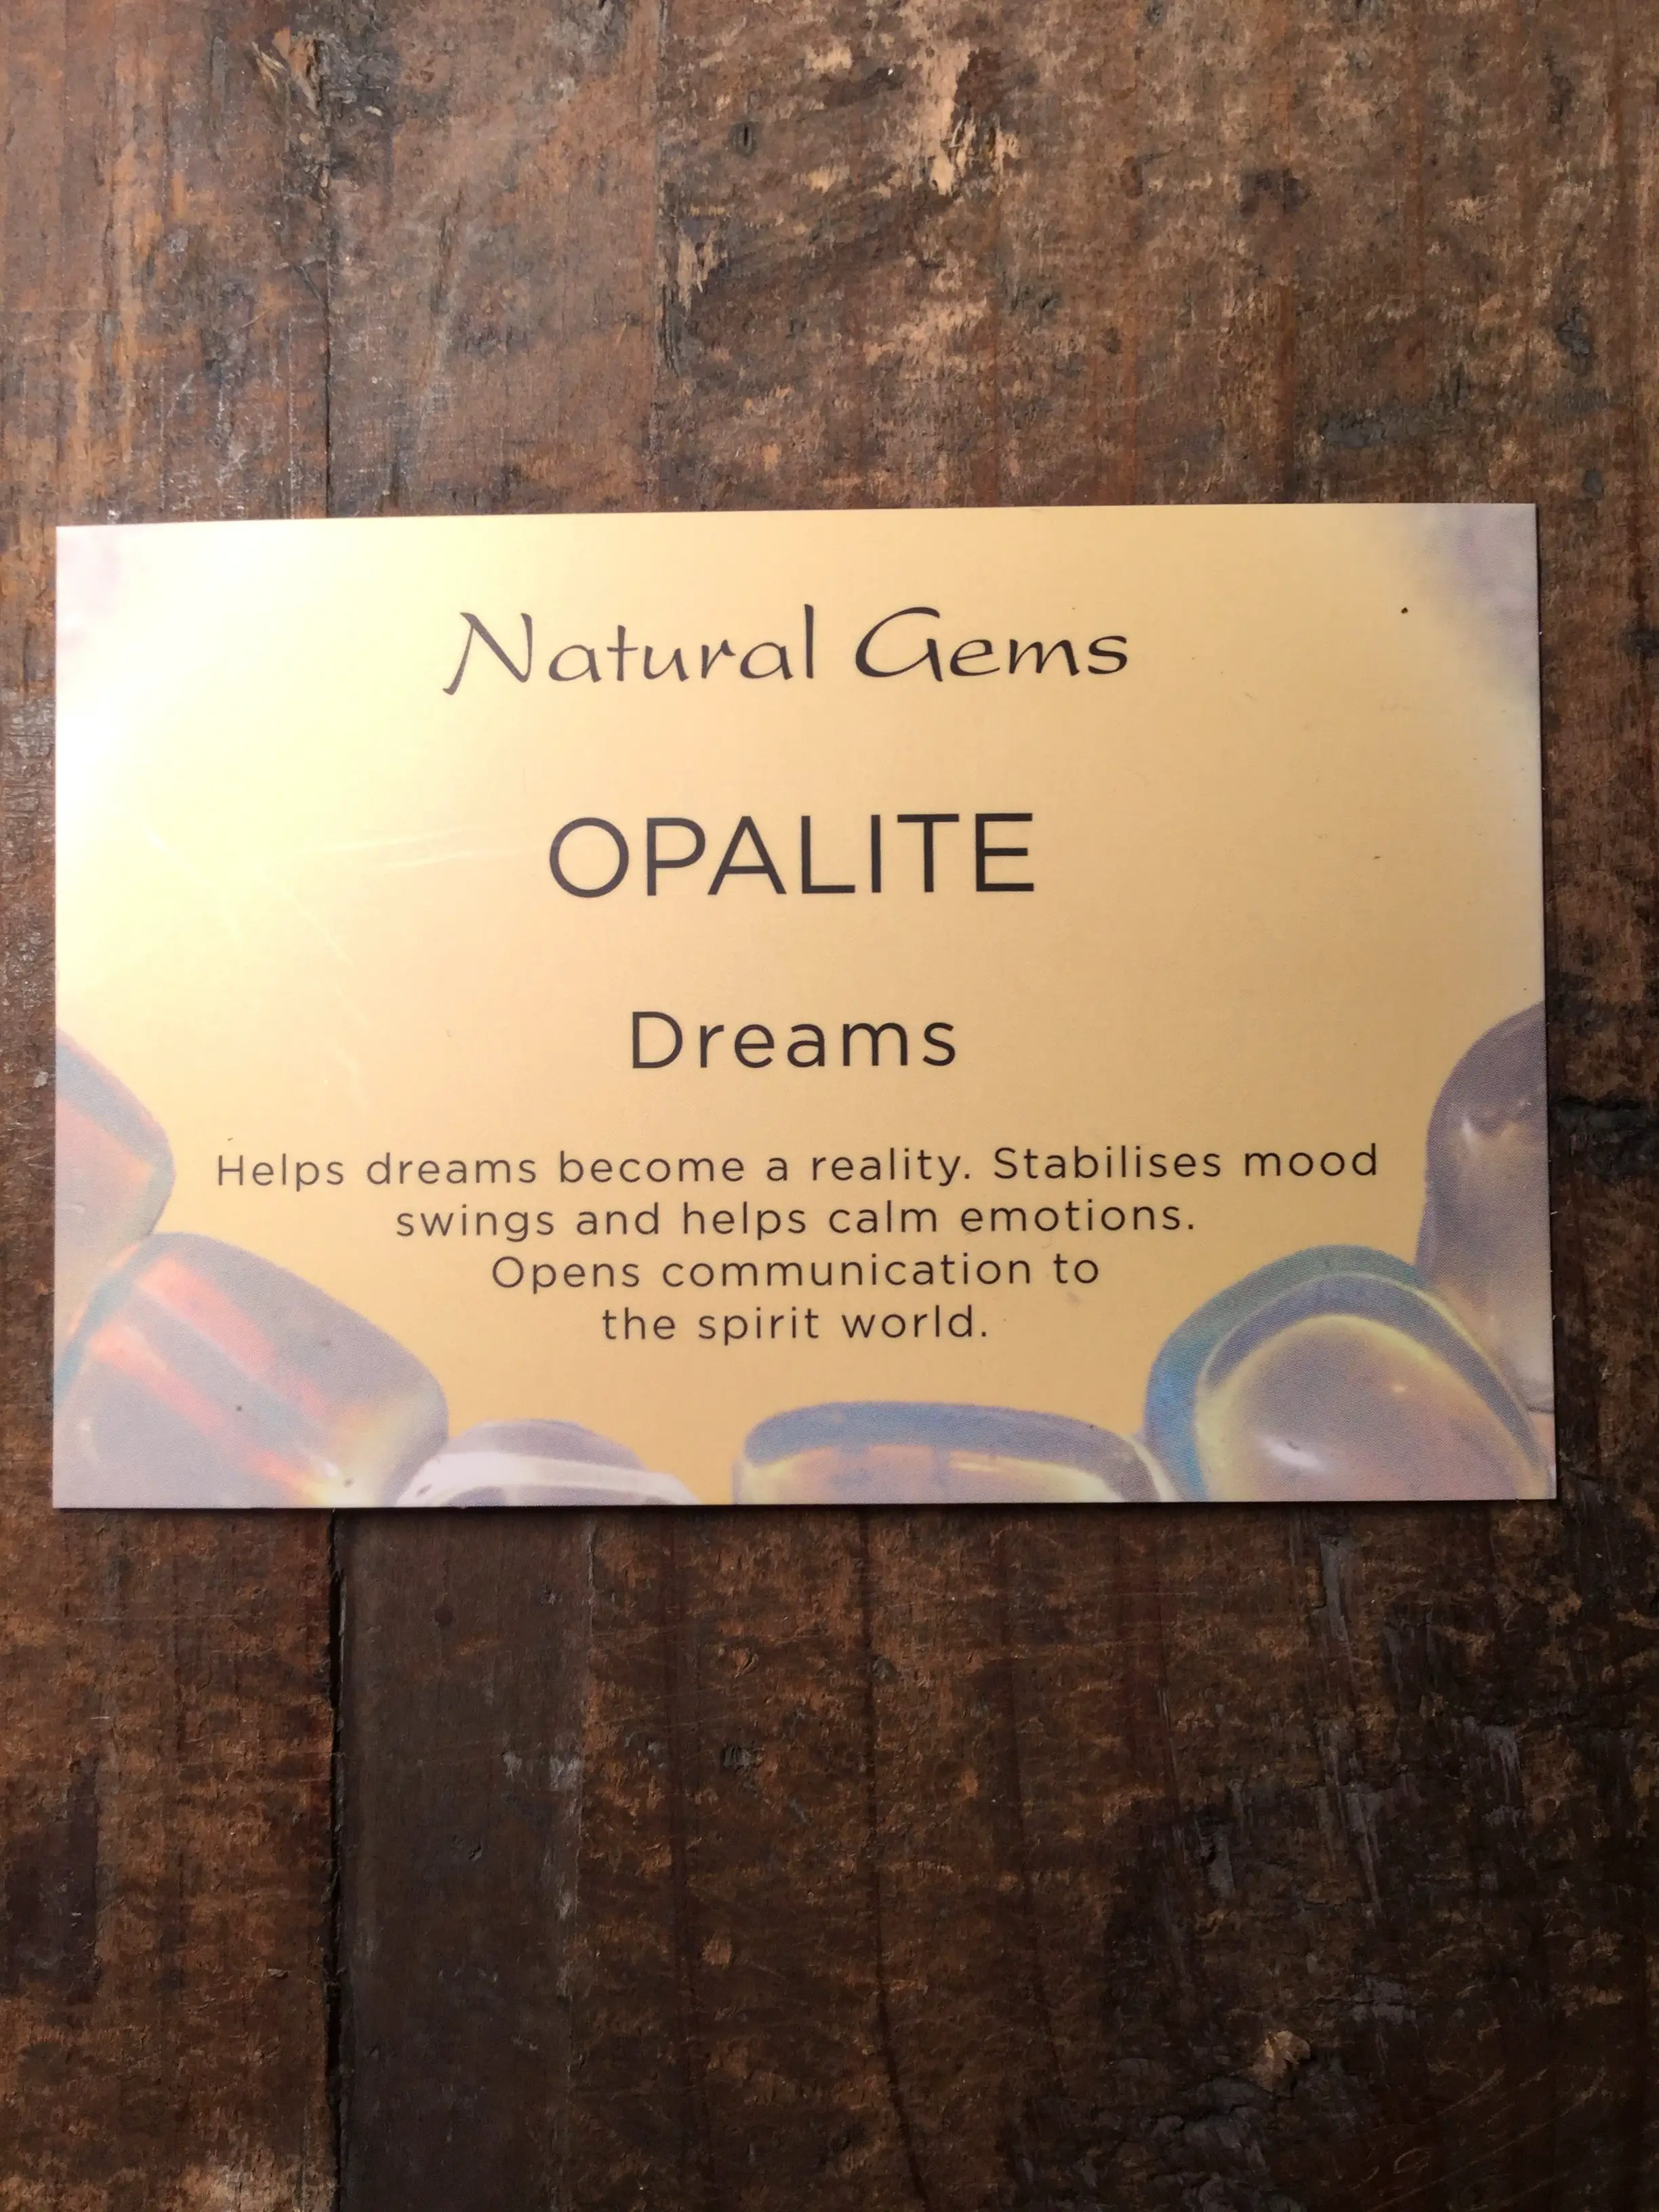 What Is Opalite?